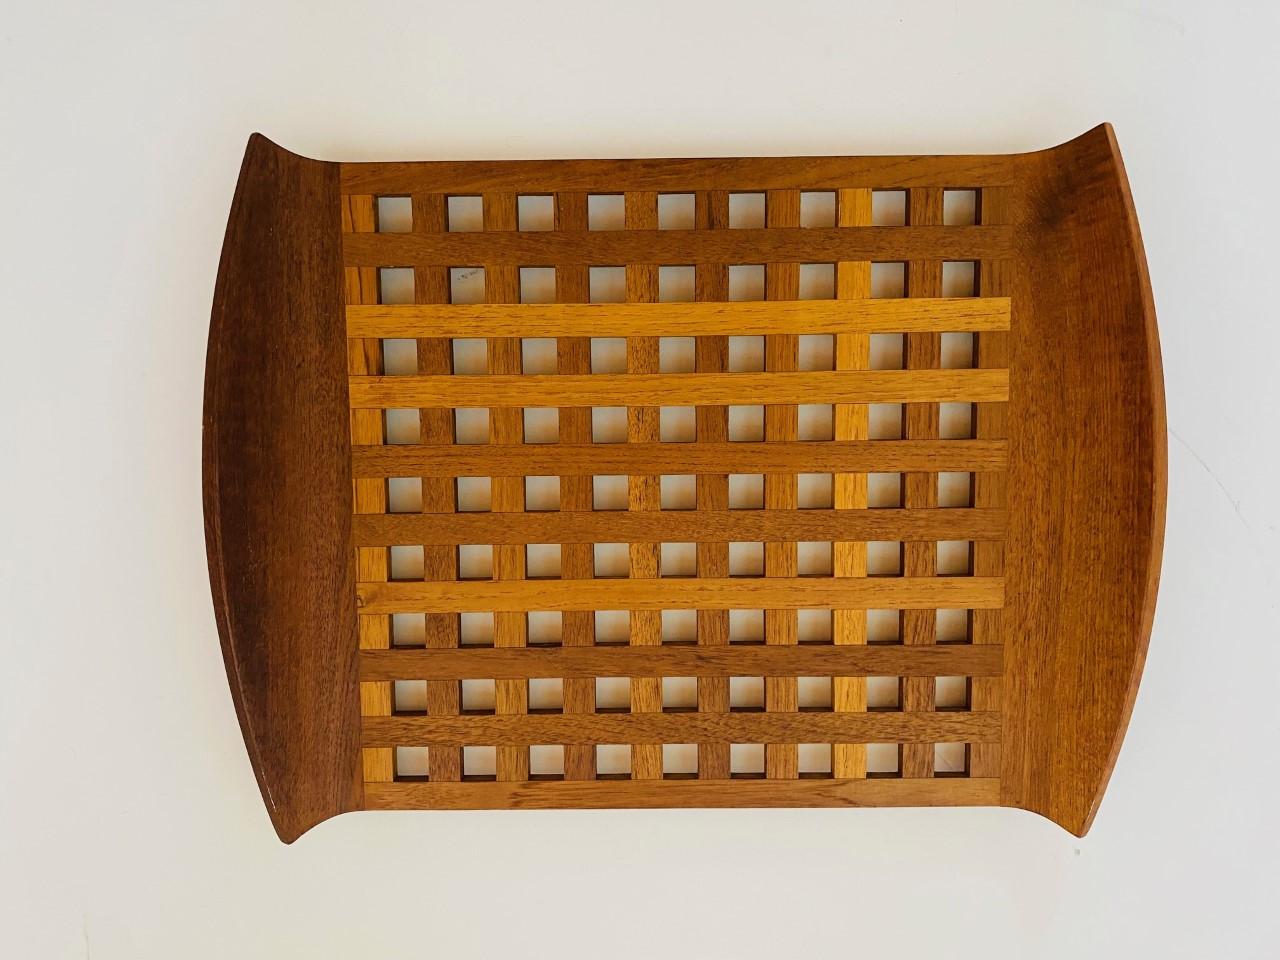 Incredible and beautiful design on this large solid teak, a tray designed by Quistgaard for Dansk, circa the 1950s, great condition with raised edges, incredible craftsmanship. early stamp at the bottom. Beautiful effect on the lattice design and